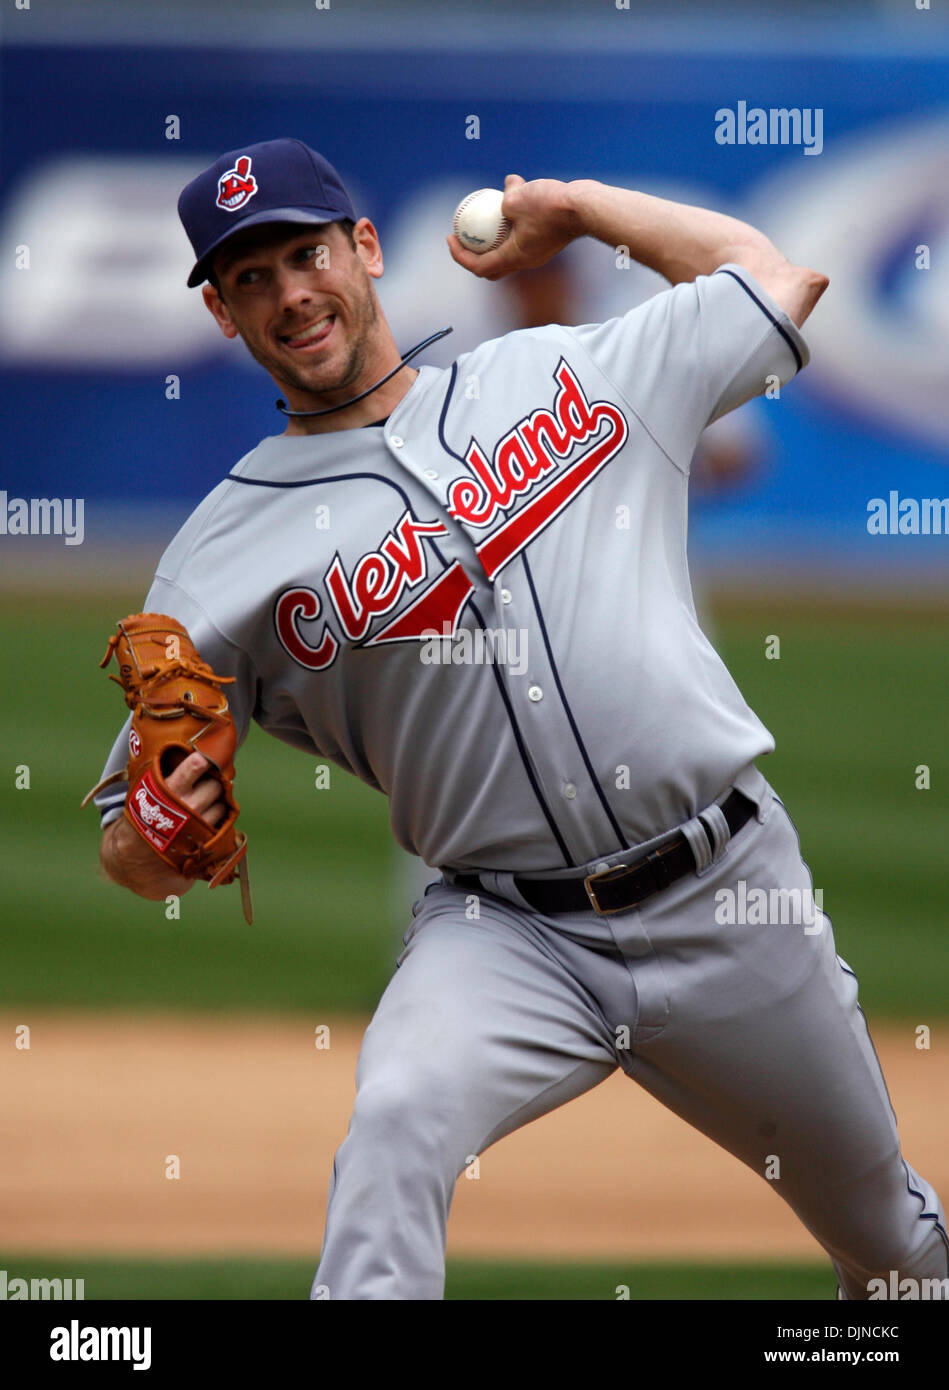 Cleveland Indians starting pitcher Cliff Lee delivers against the